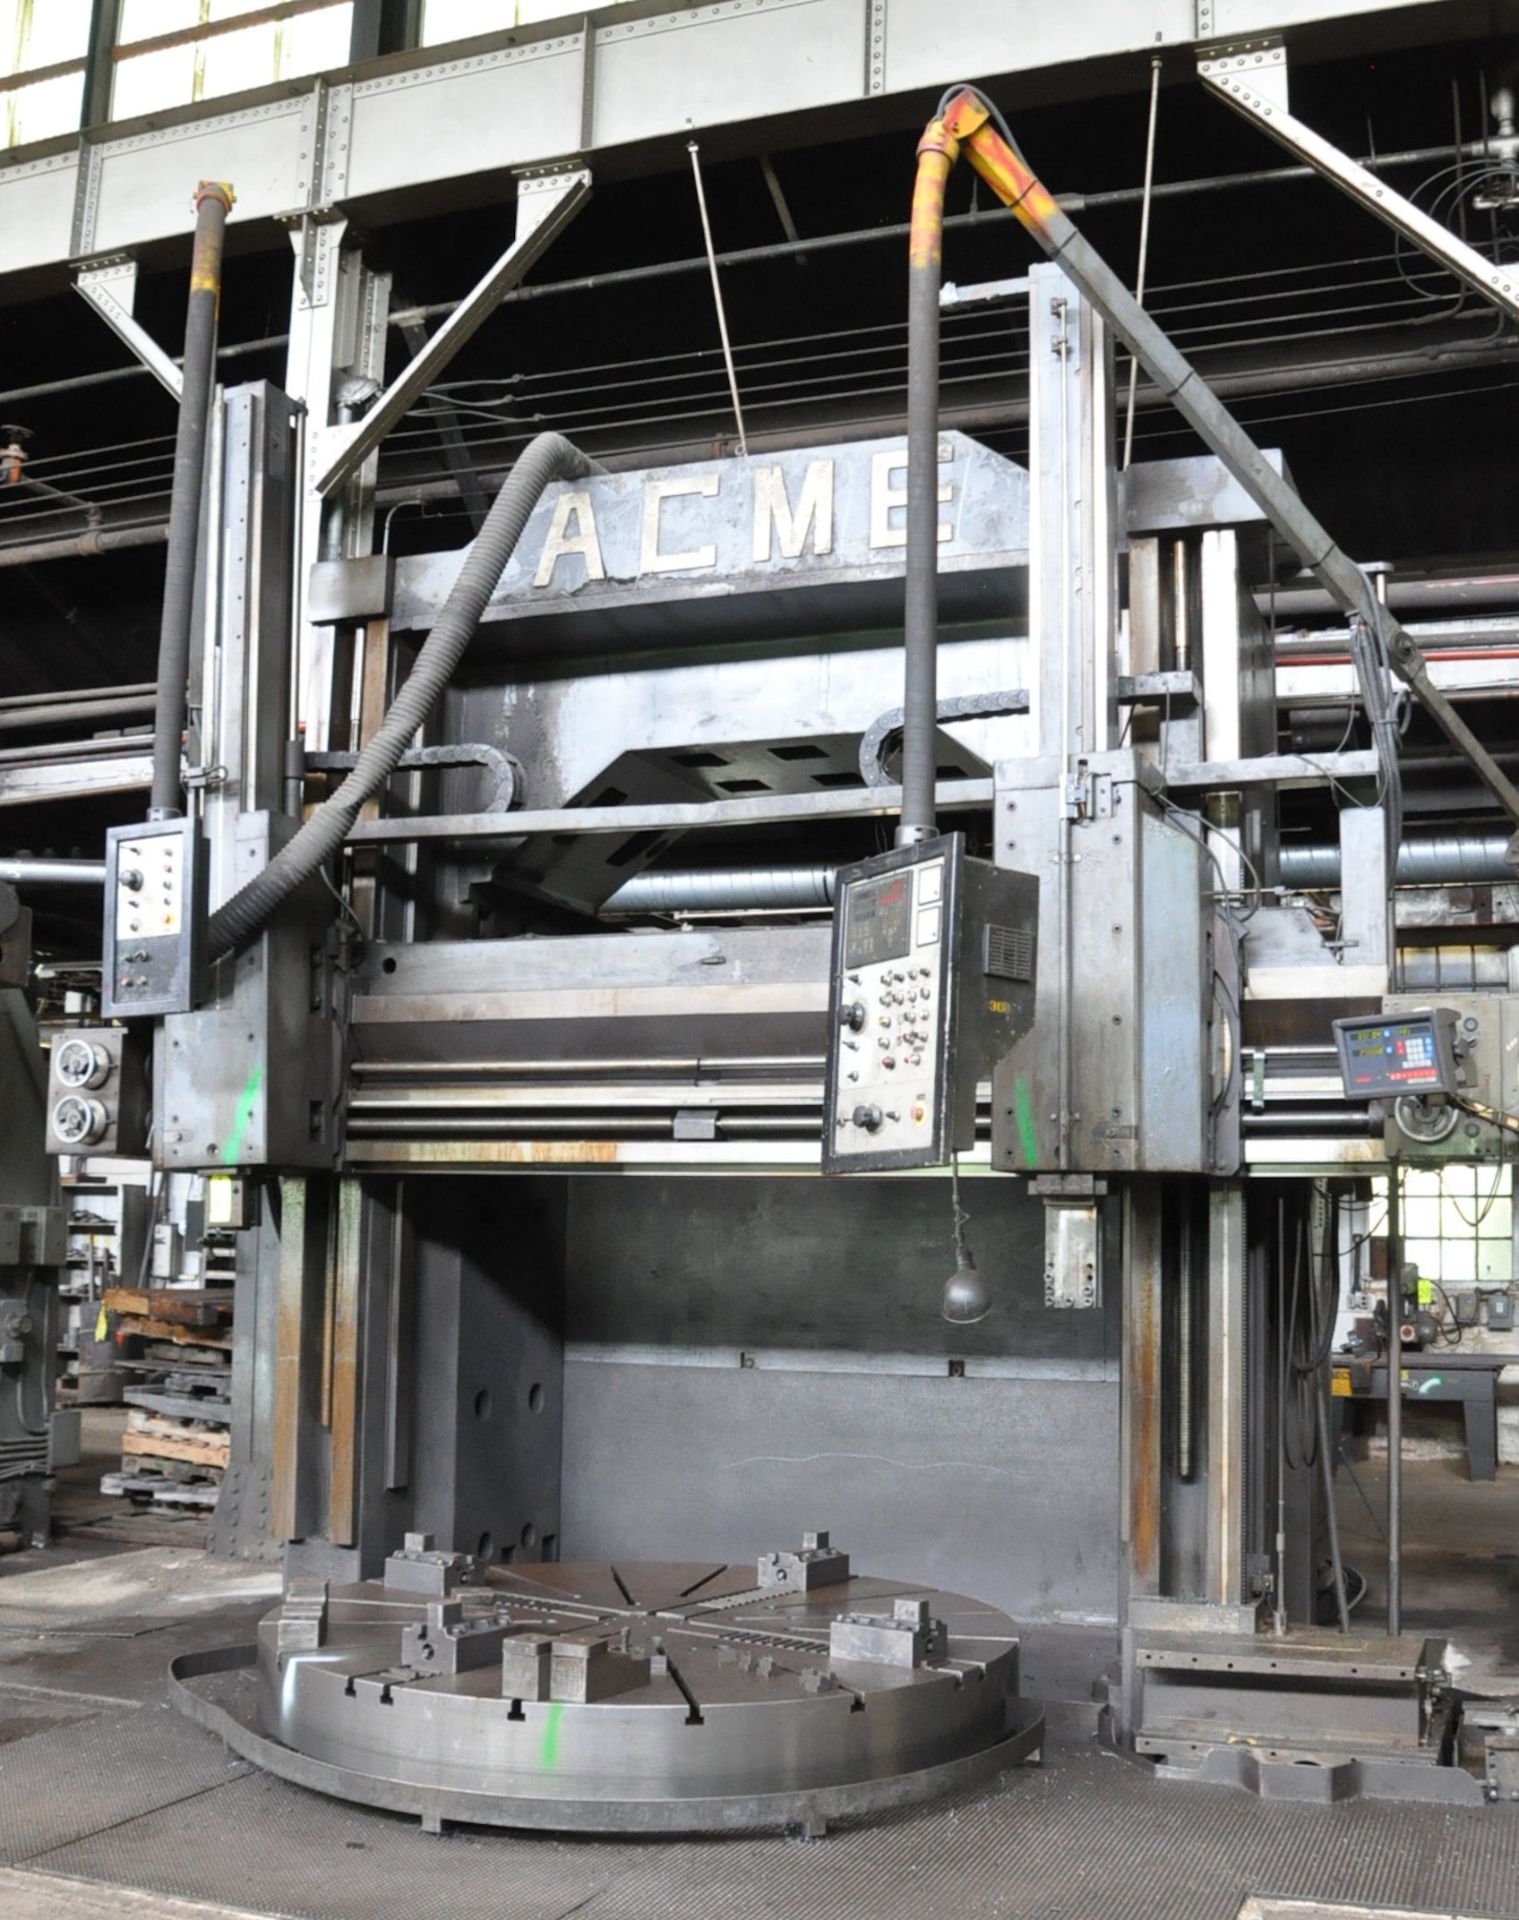 102" Acme Vertical Lathe, S/n N/a, Newall DP7 2-Axis Digital Positioning Readout, Pendant Control